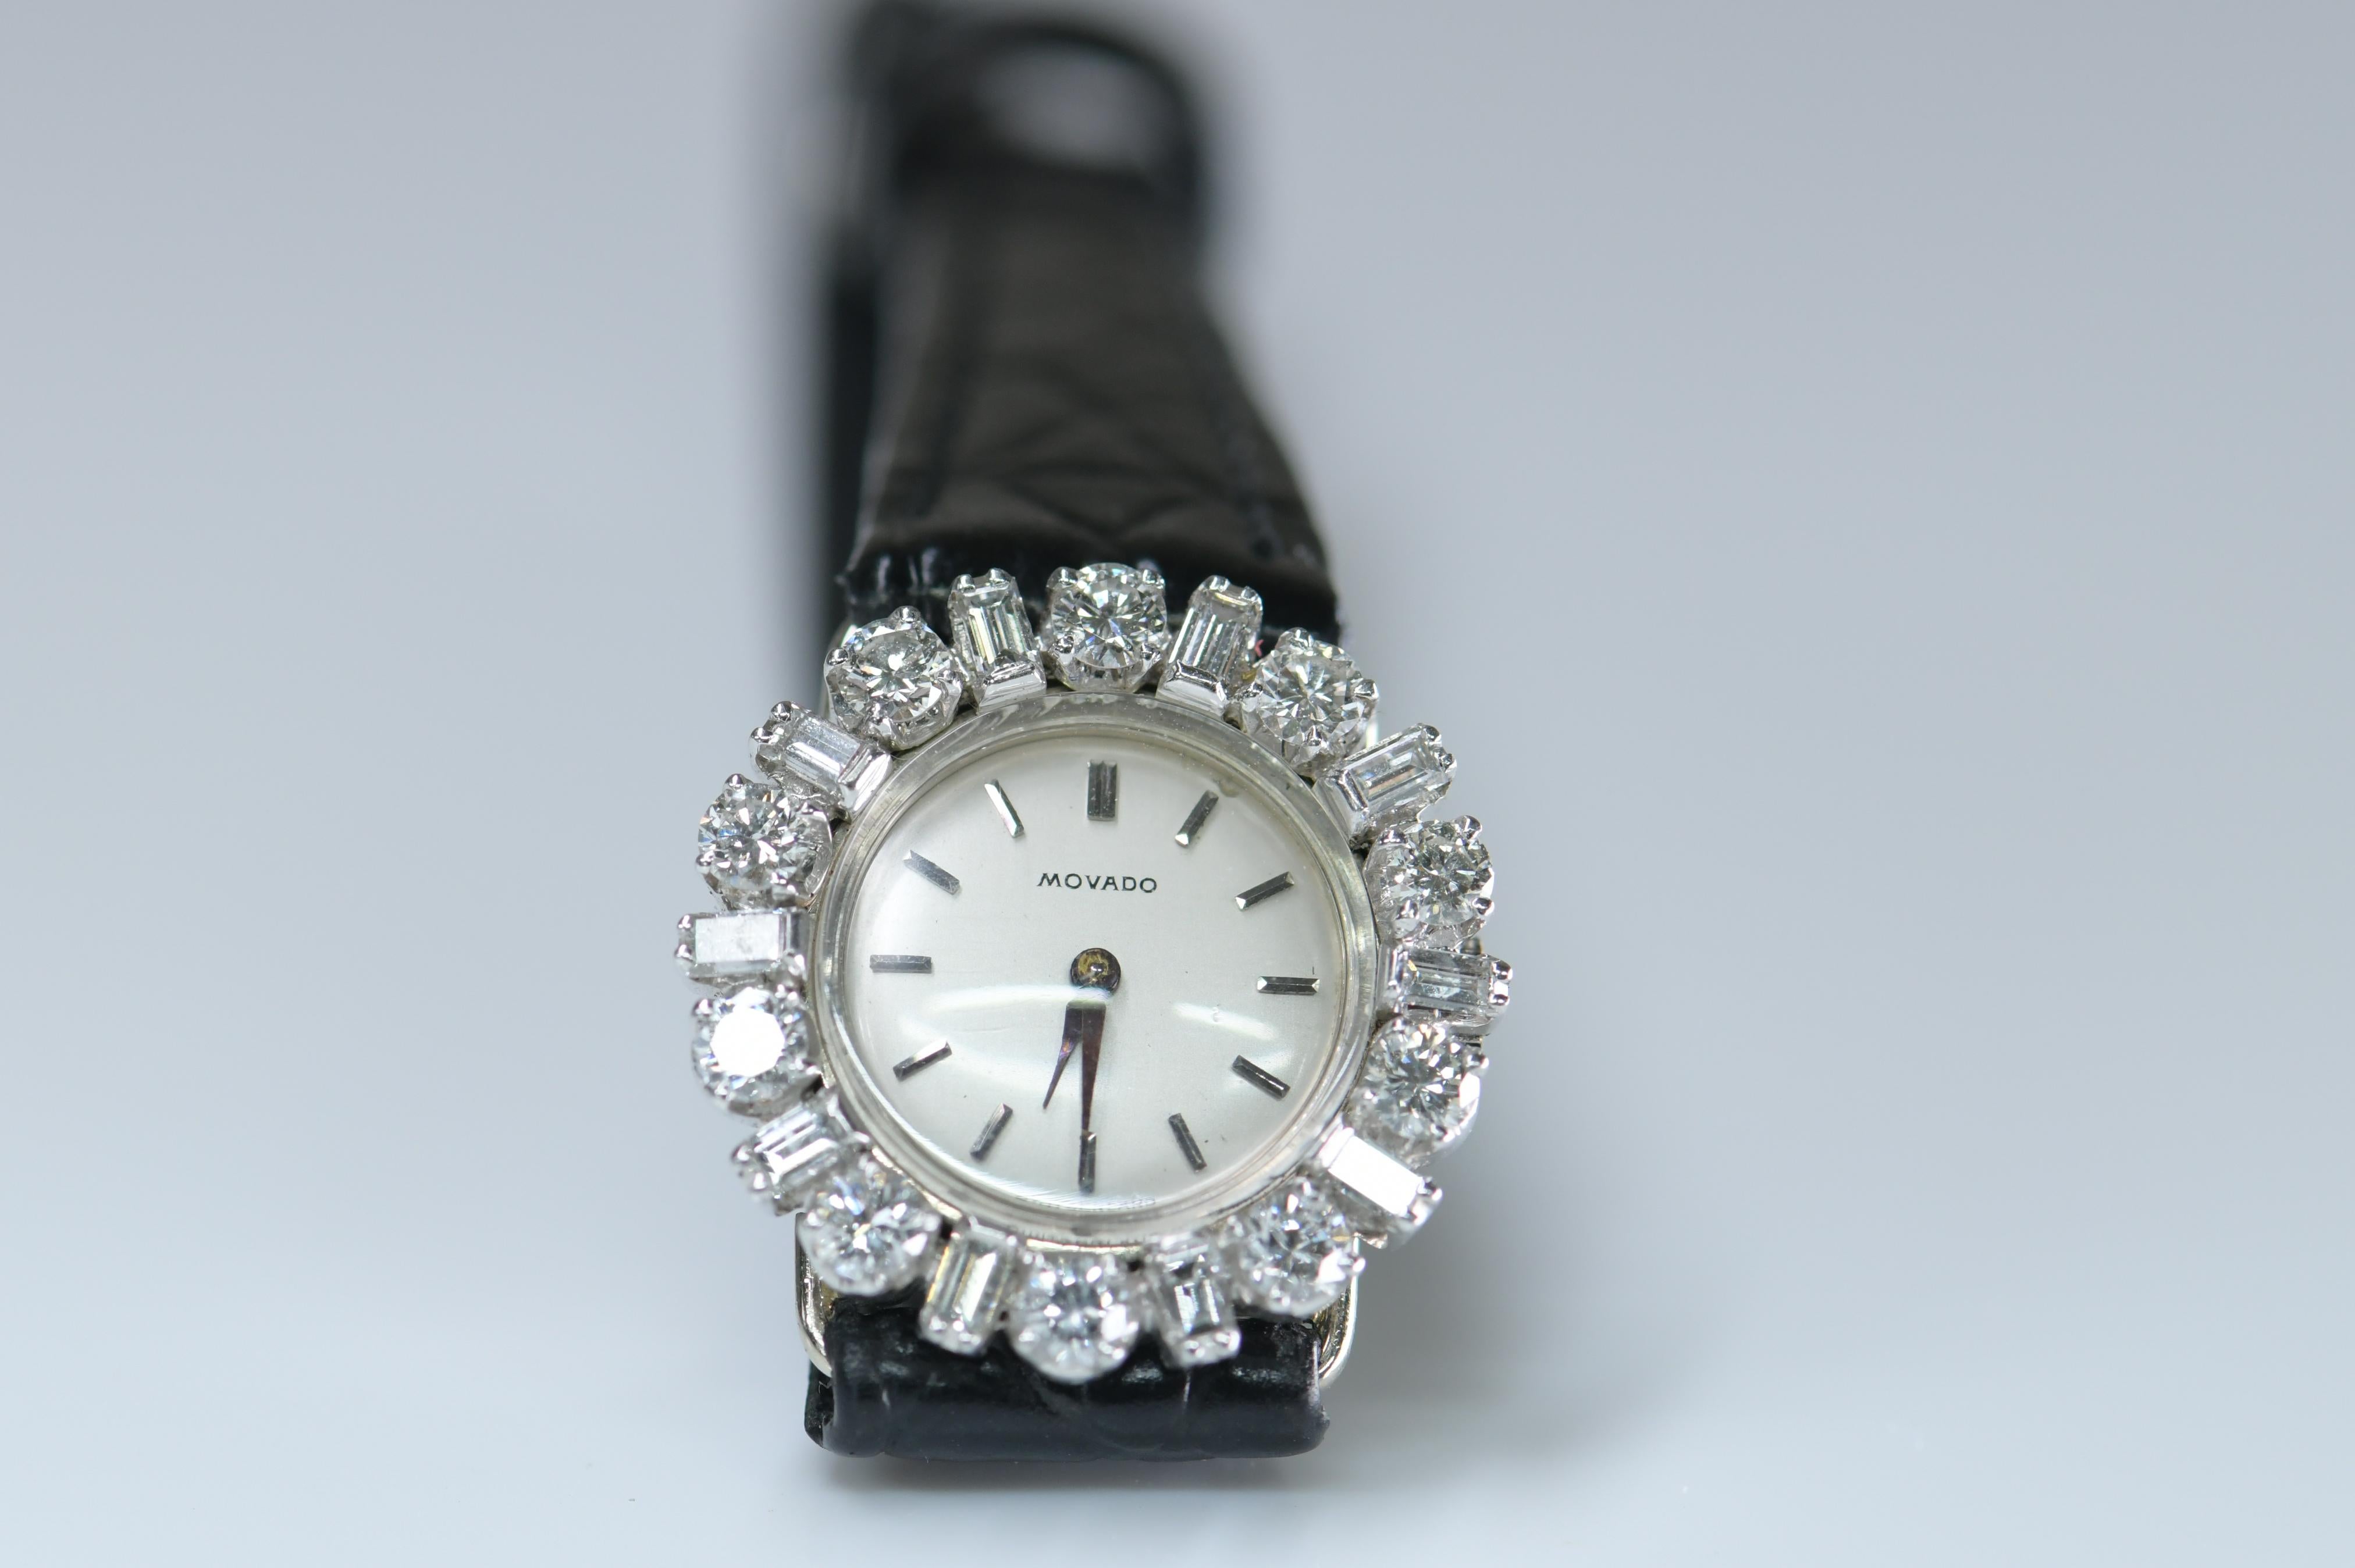 This stunning and sophisticated Art Deco bracelet watch, crafted in 18k white gold and sparkling with bright-white diamonds.

The round dial enhanced by round and Baguette-cut diamond scrolling shoulders and a leather strip bracelet; dial and